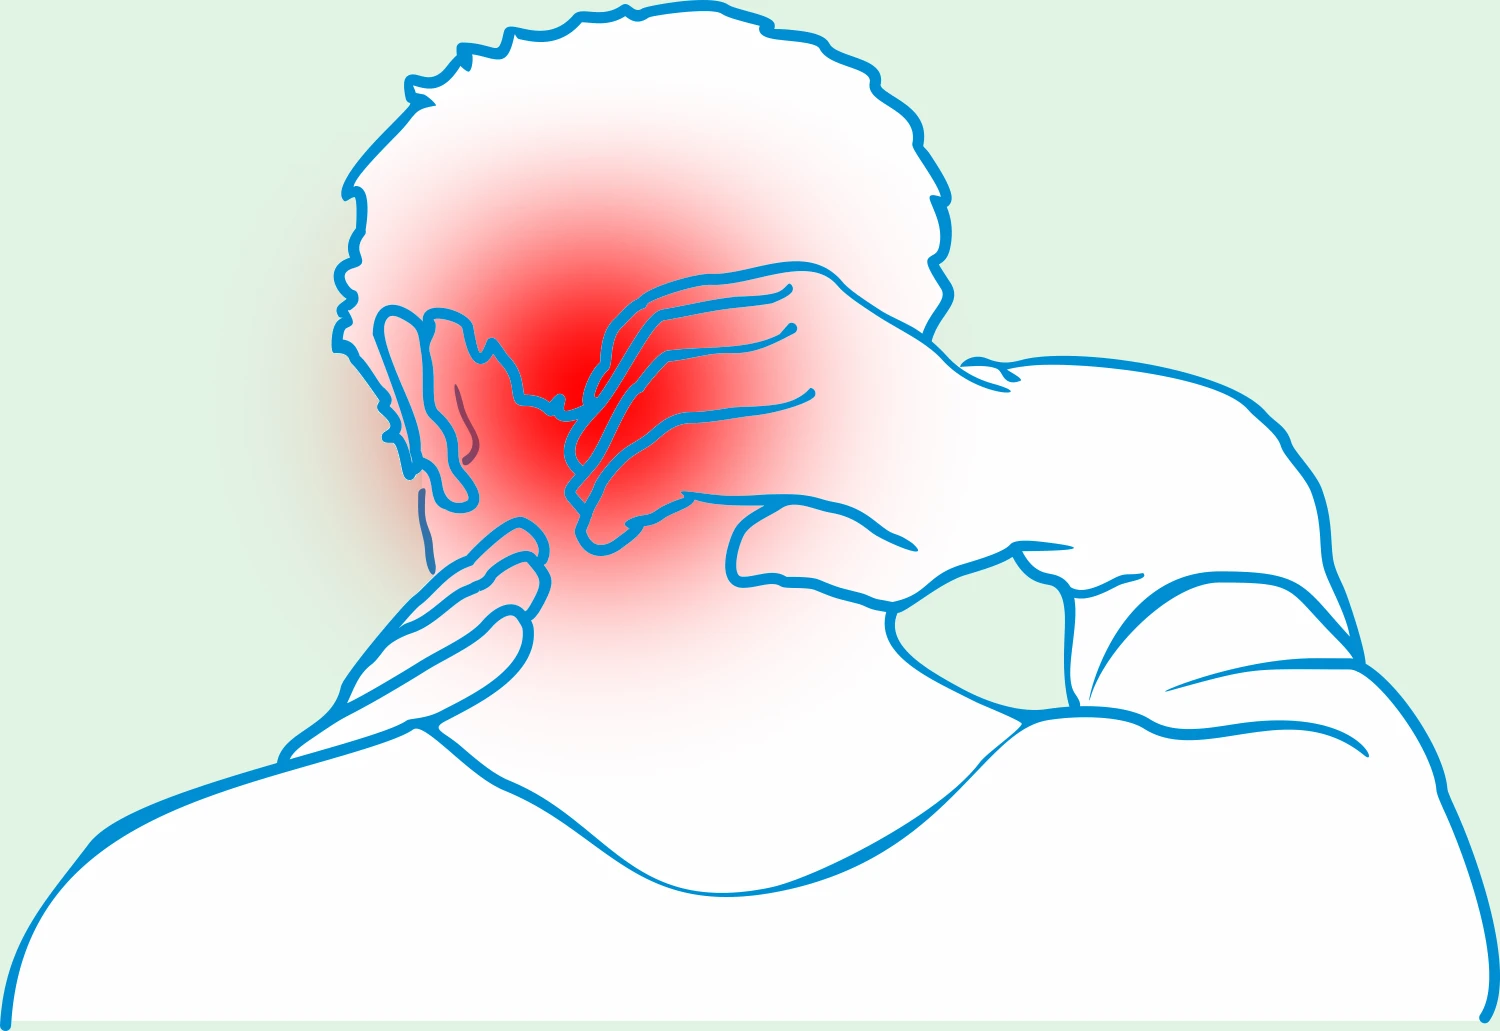 Pain in the back of the head, occipital migraine, aching neck